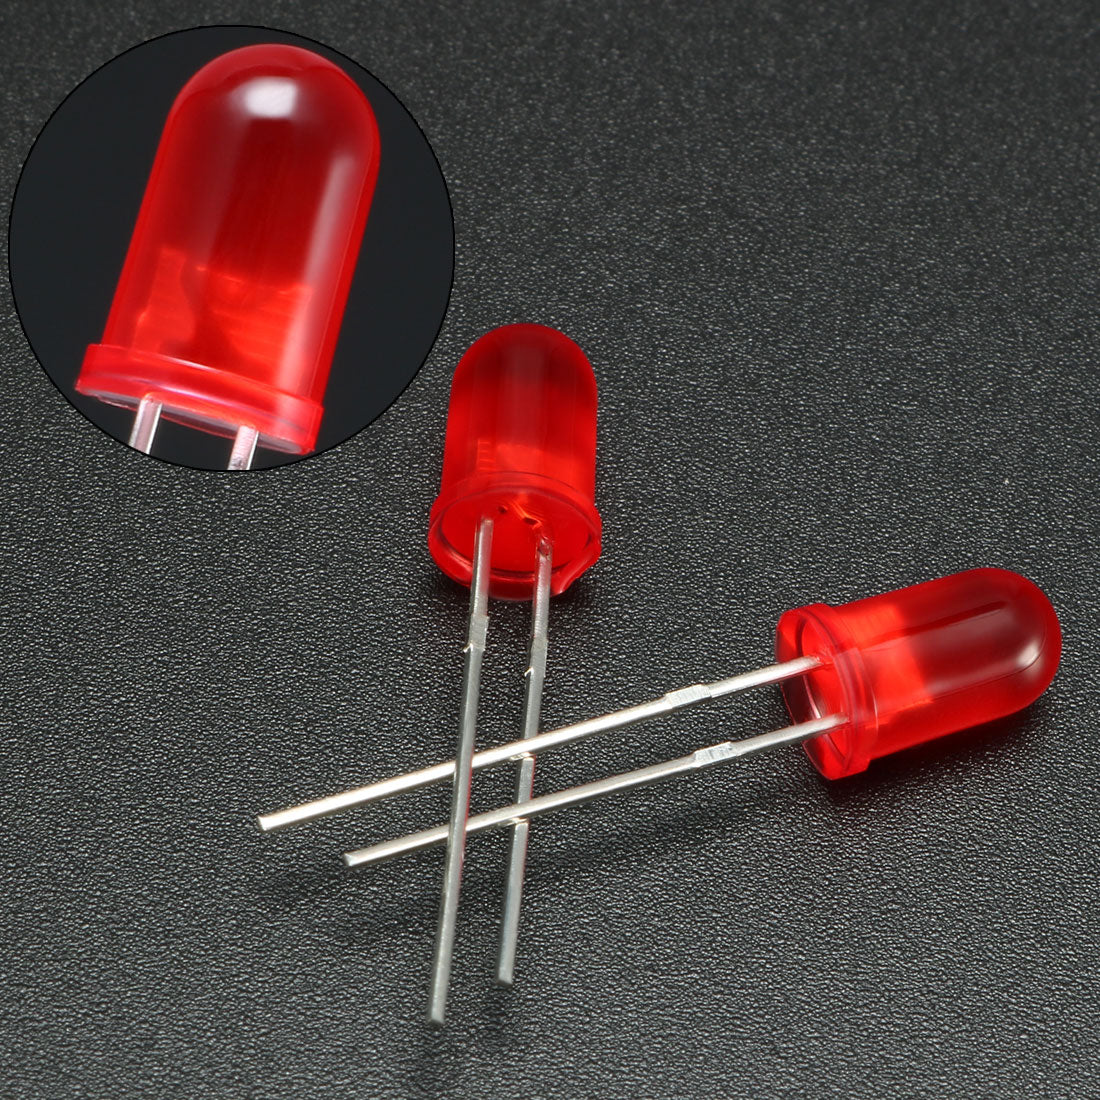 uxcell Uxcell 70pcs 5mm Red LED Diode Lights Colored Lens Diffused Round 1.9-2.1V 20mA 0.02W Lighting Bulb Lamp Electronic Components Light Emitting Diodes